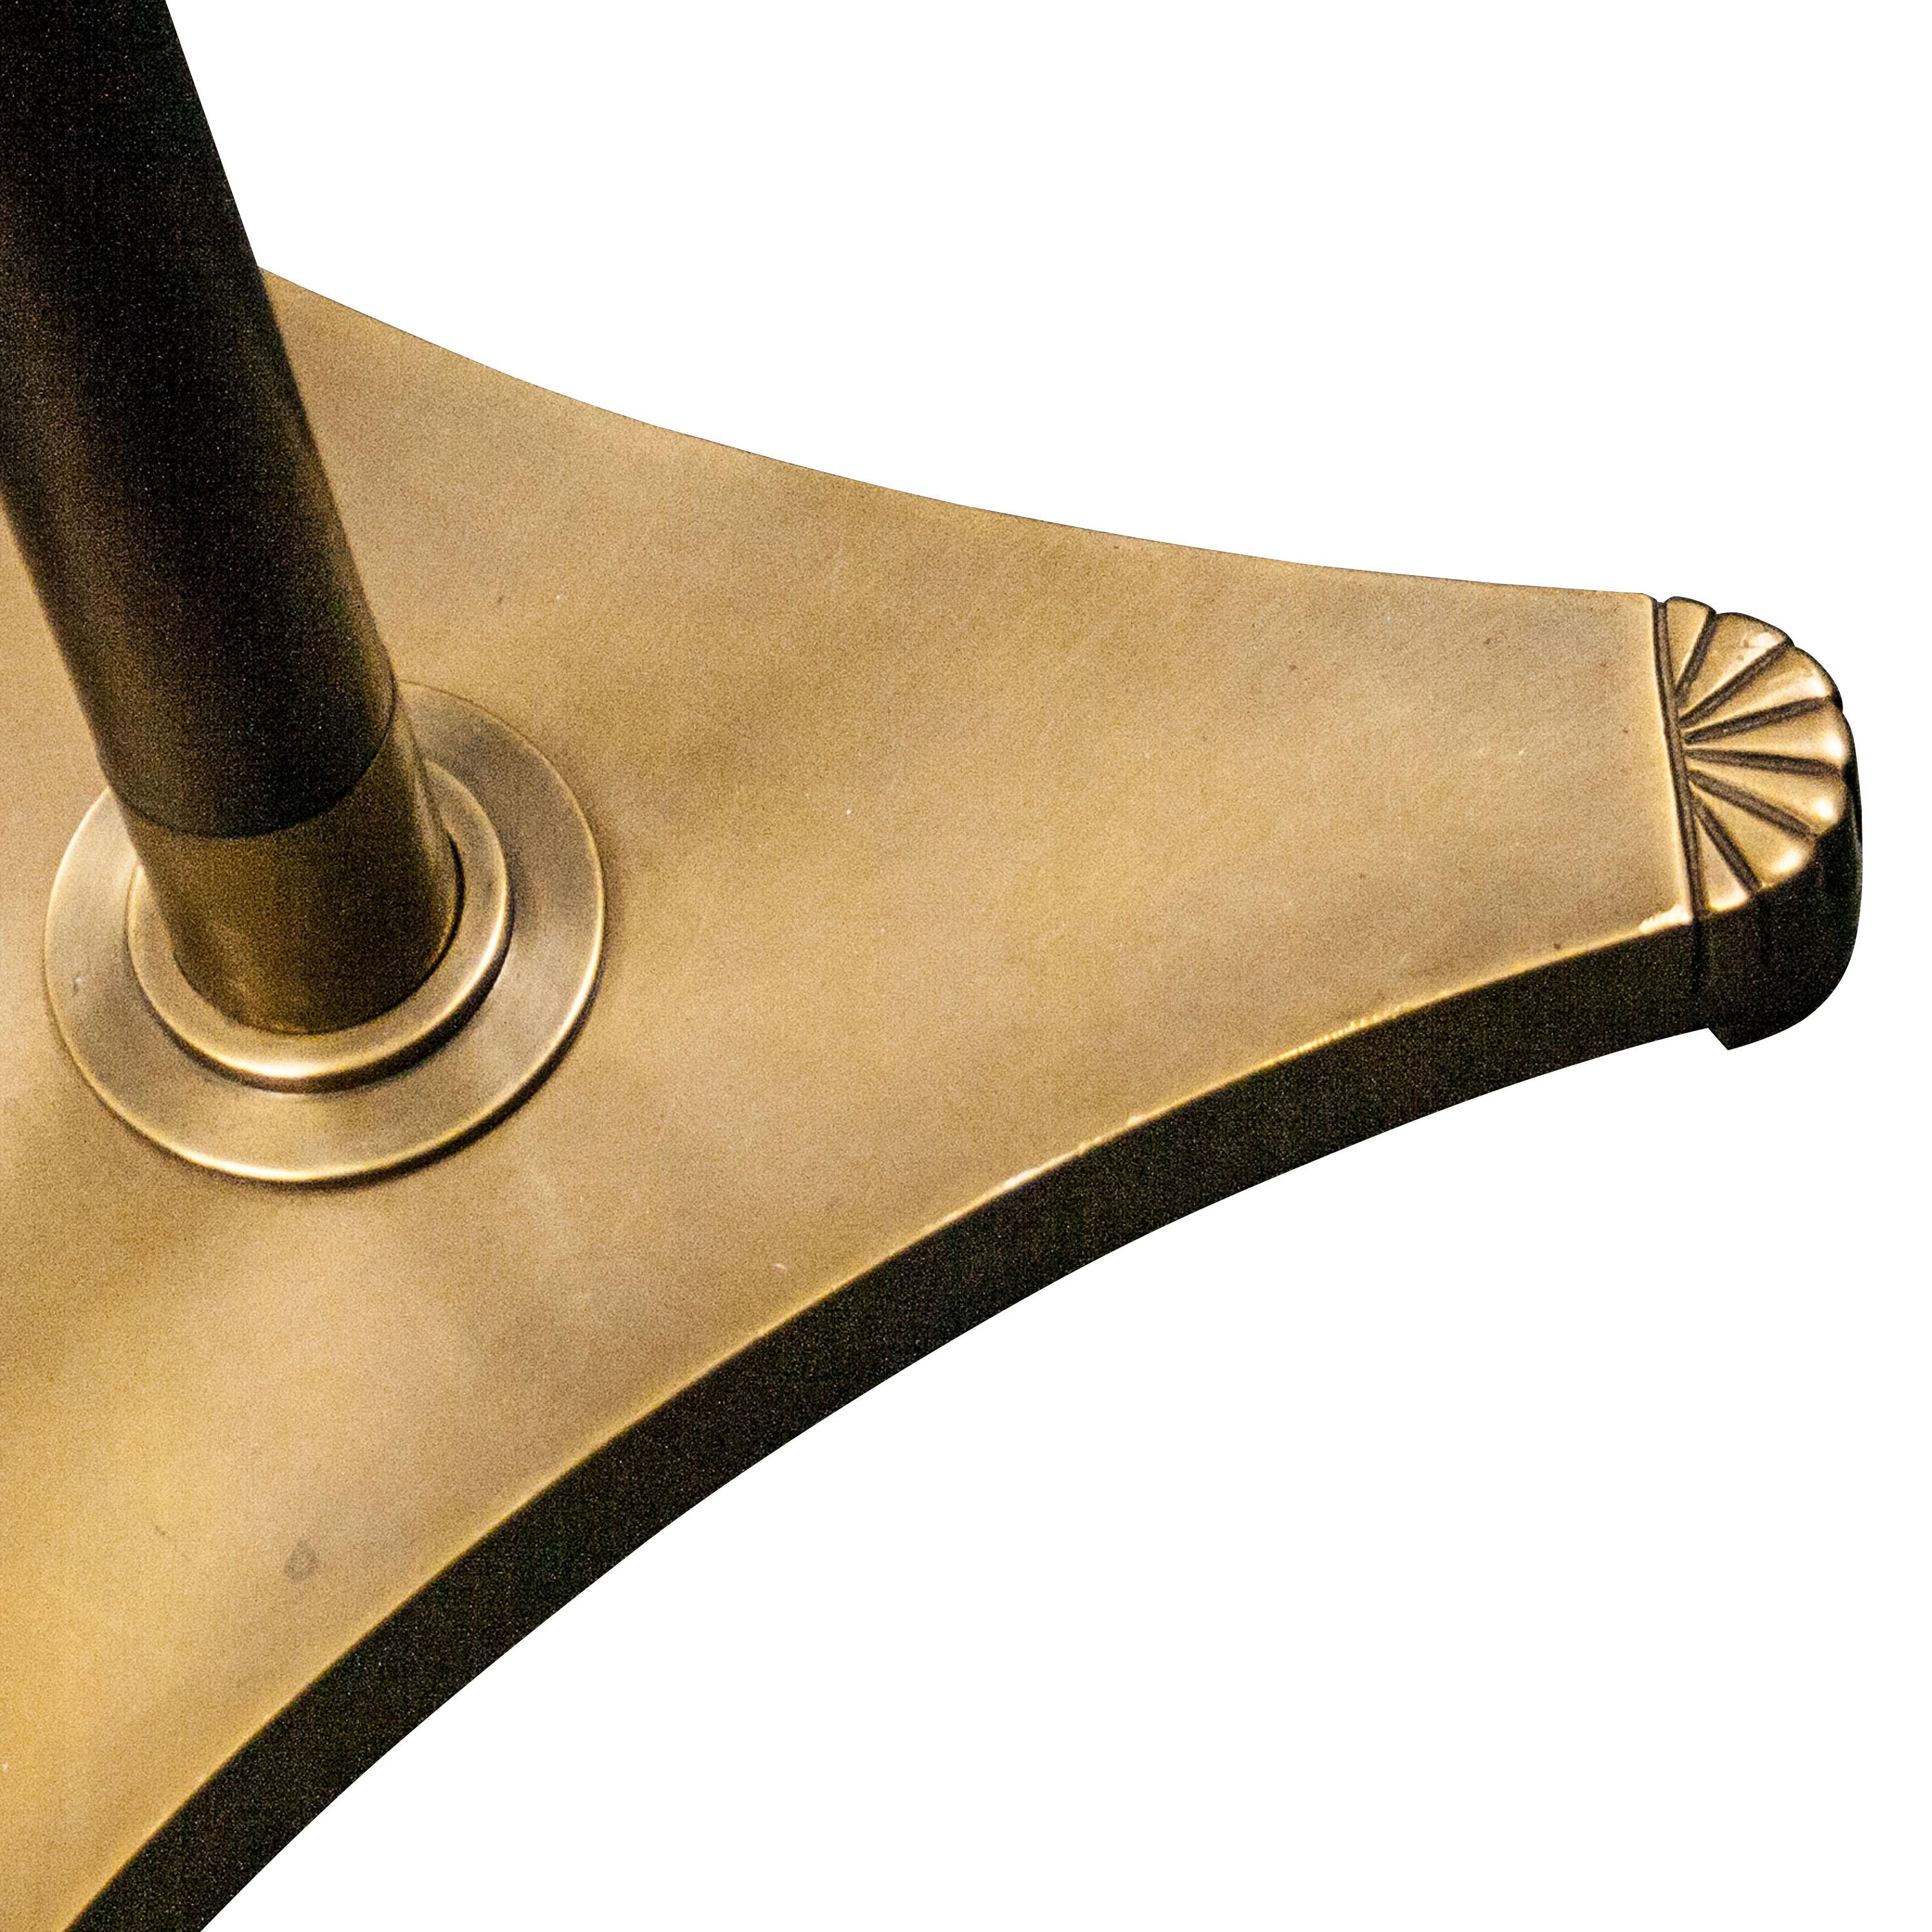 Mahogany floor lamp with brass foot and details. Opaque beige shade and golden inside.